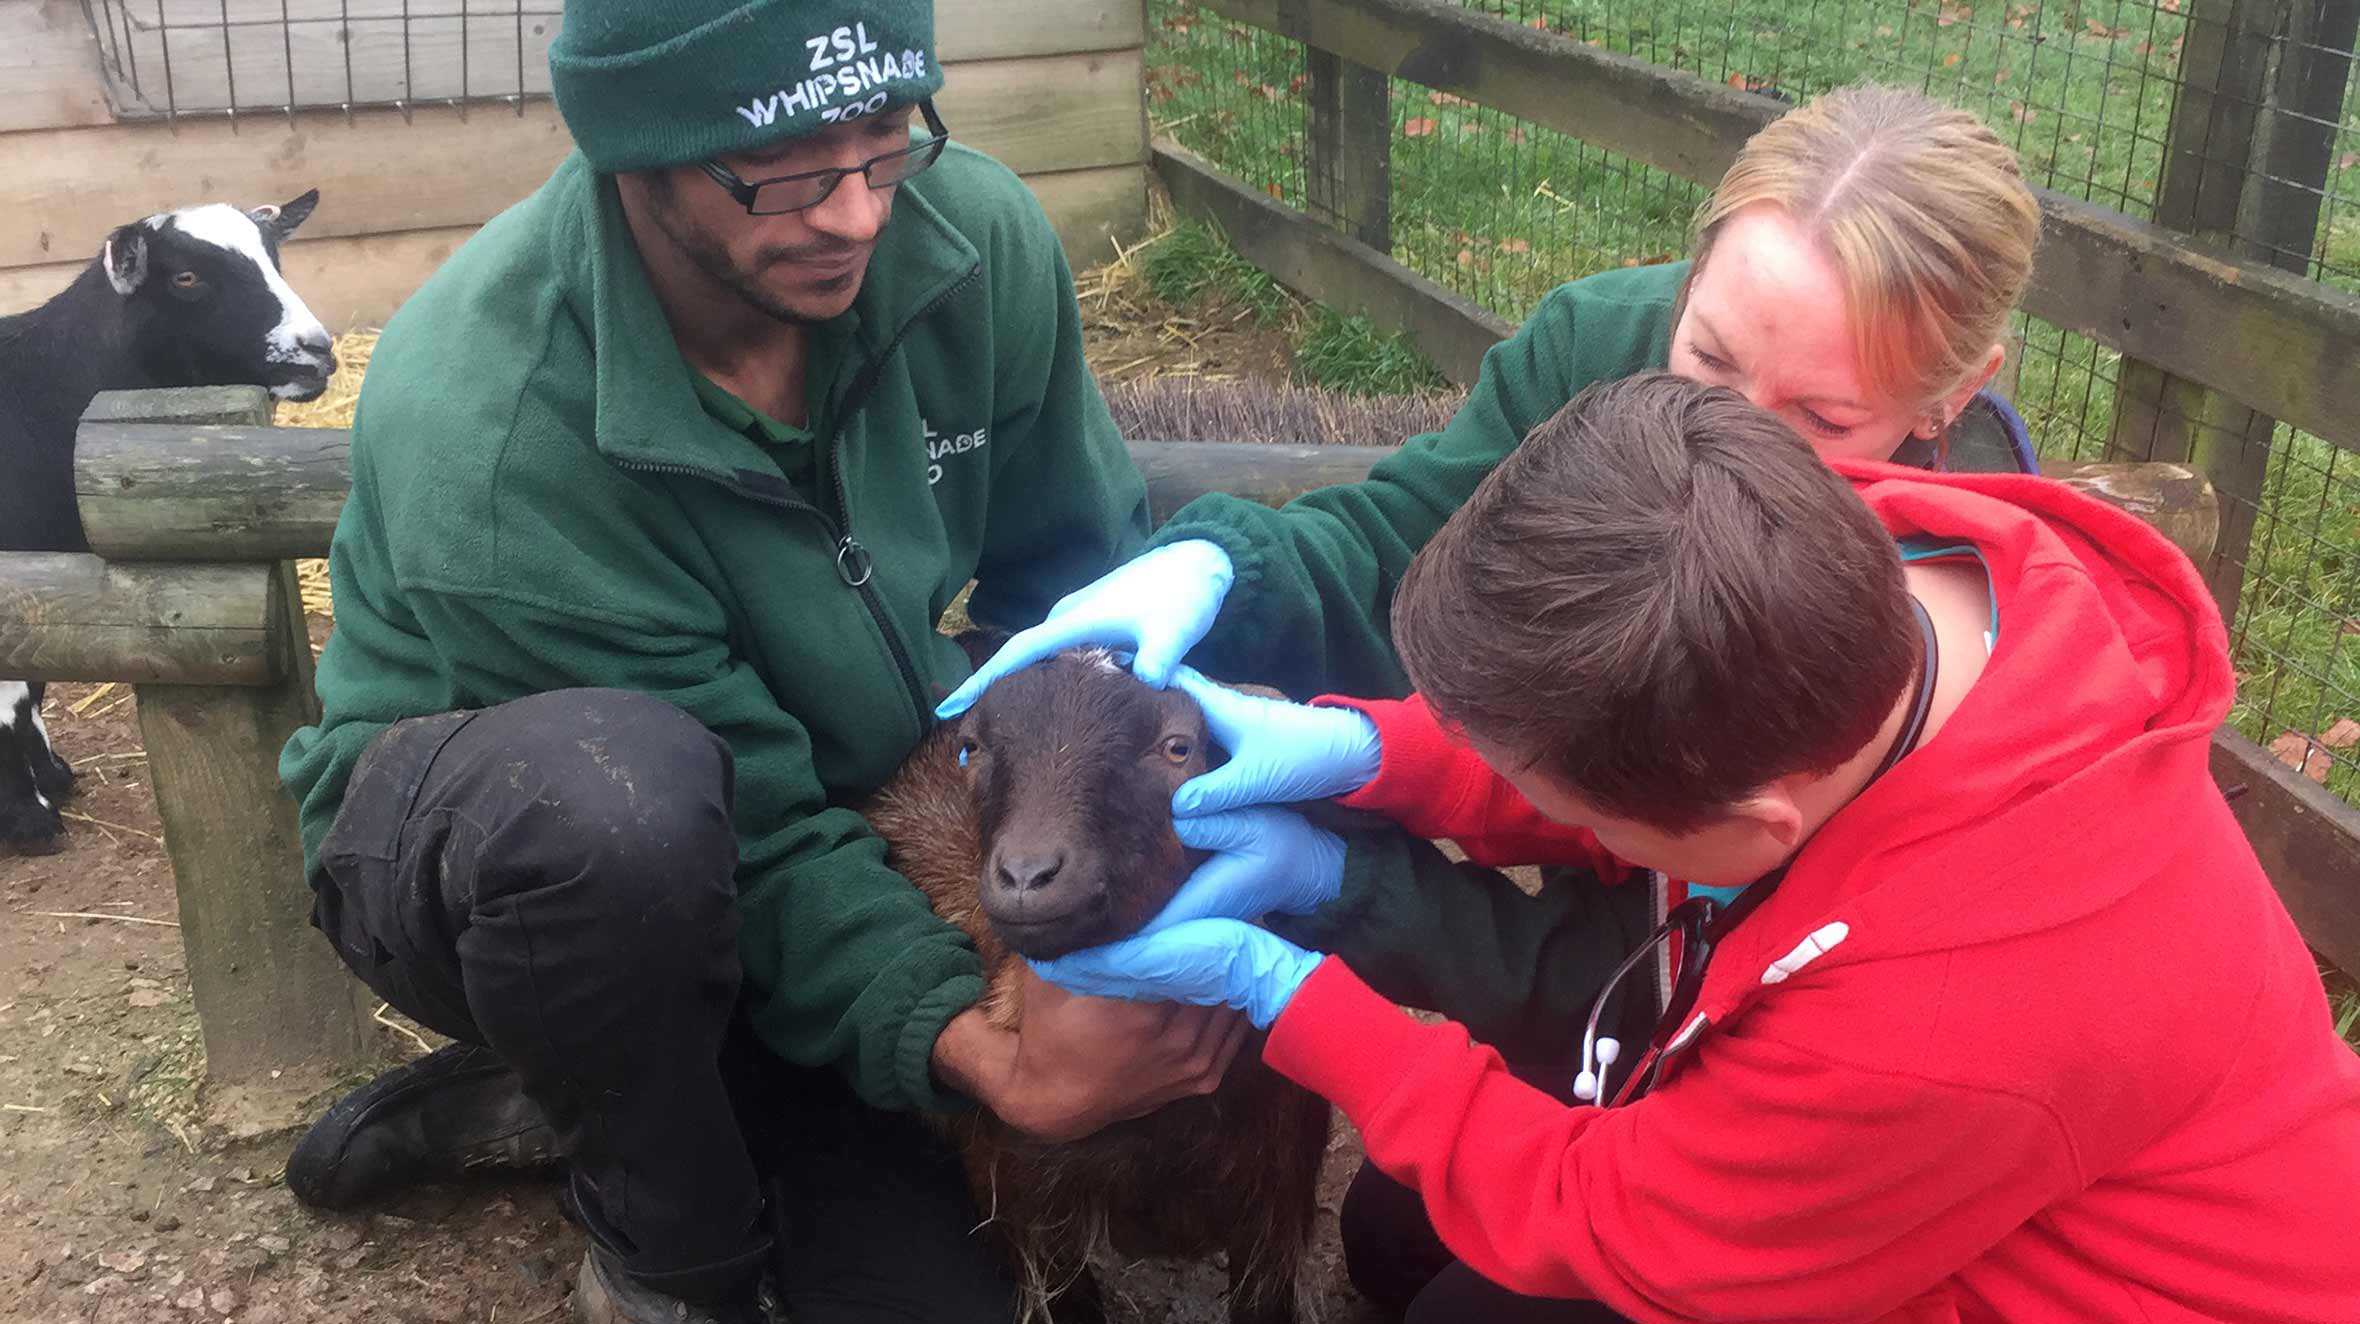 A couple of members of zoo staff helping Harrison to feed one of the goats.